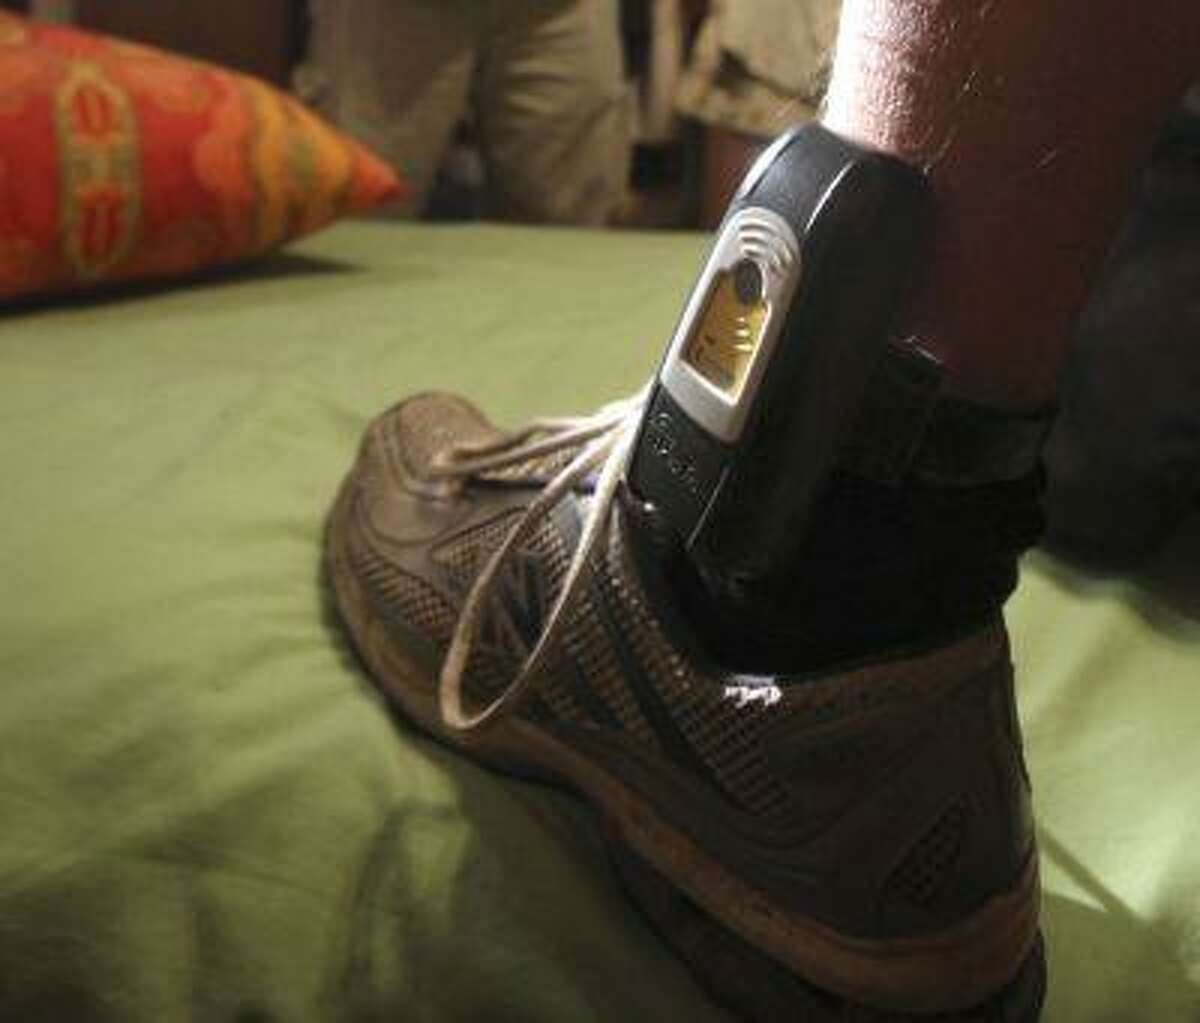 Electronic Monitoring as an Alternative to Jail